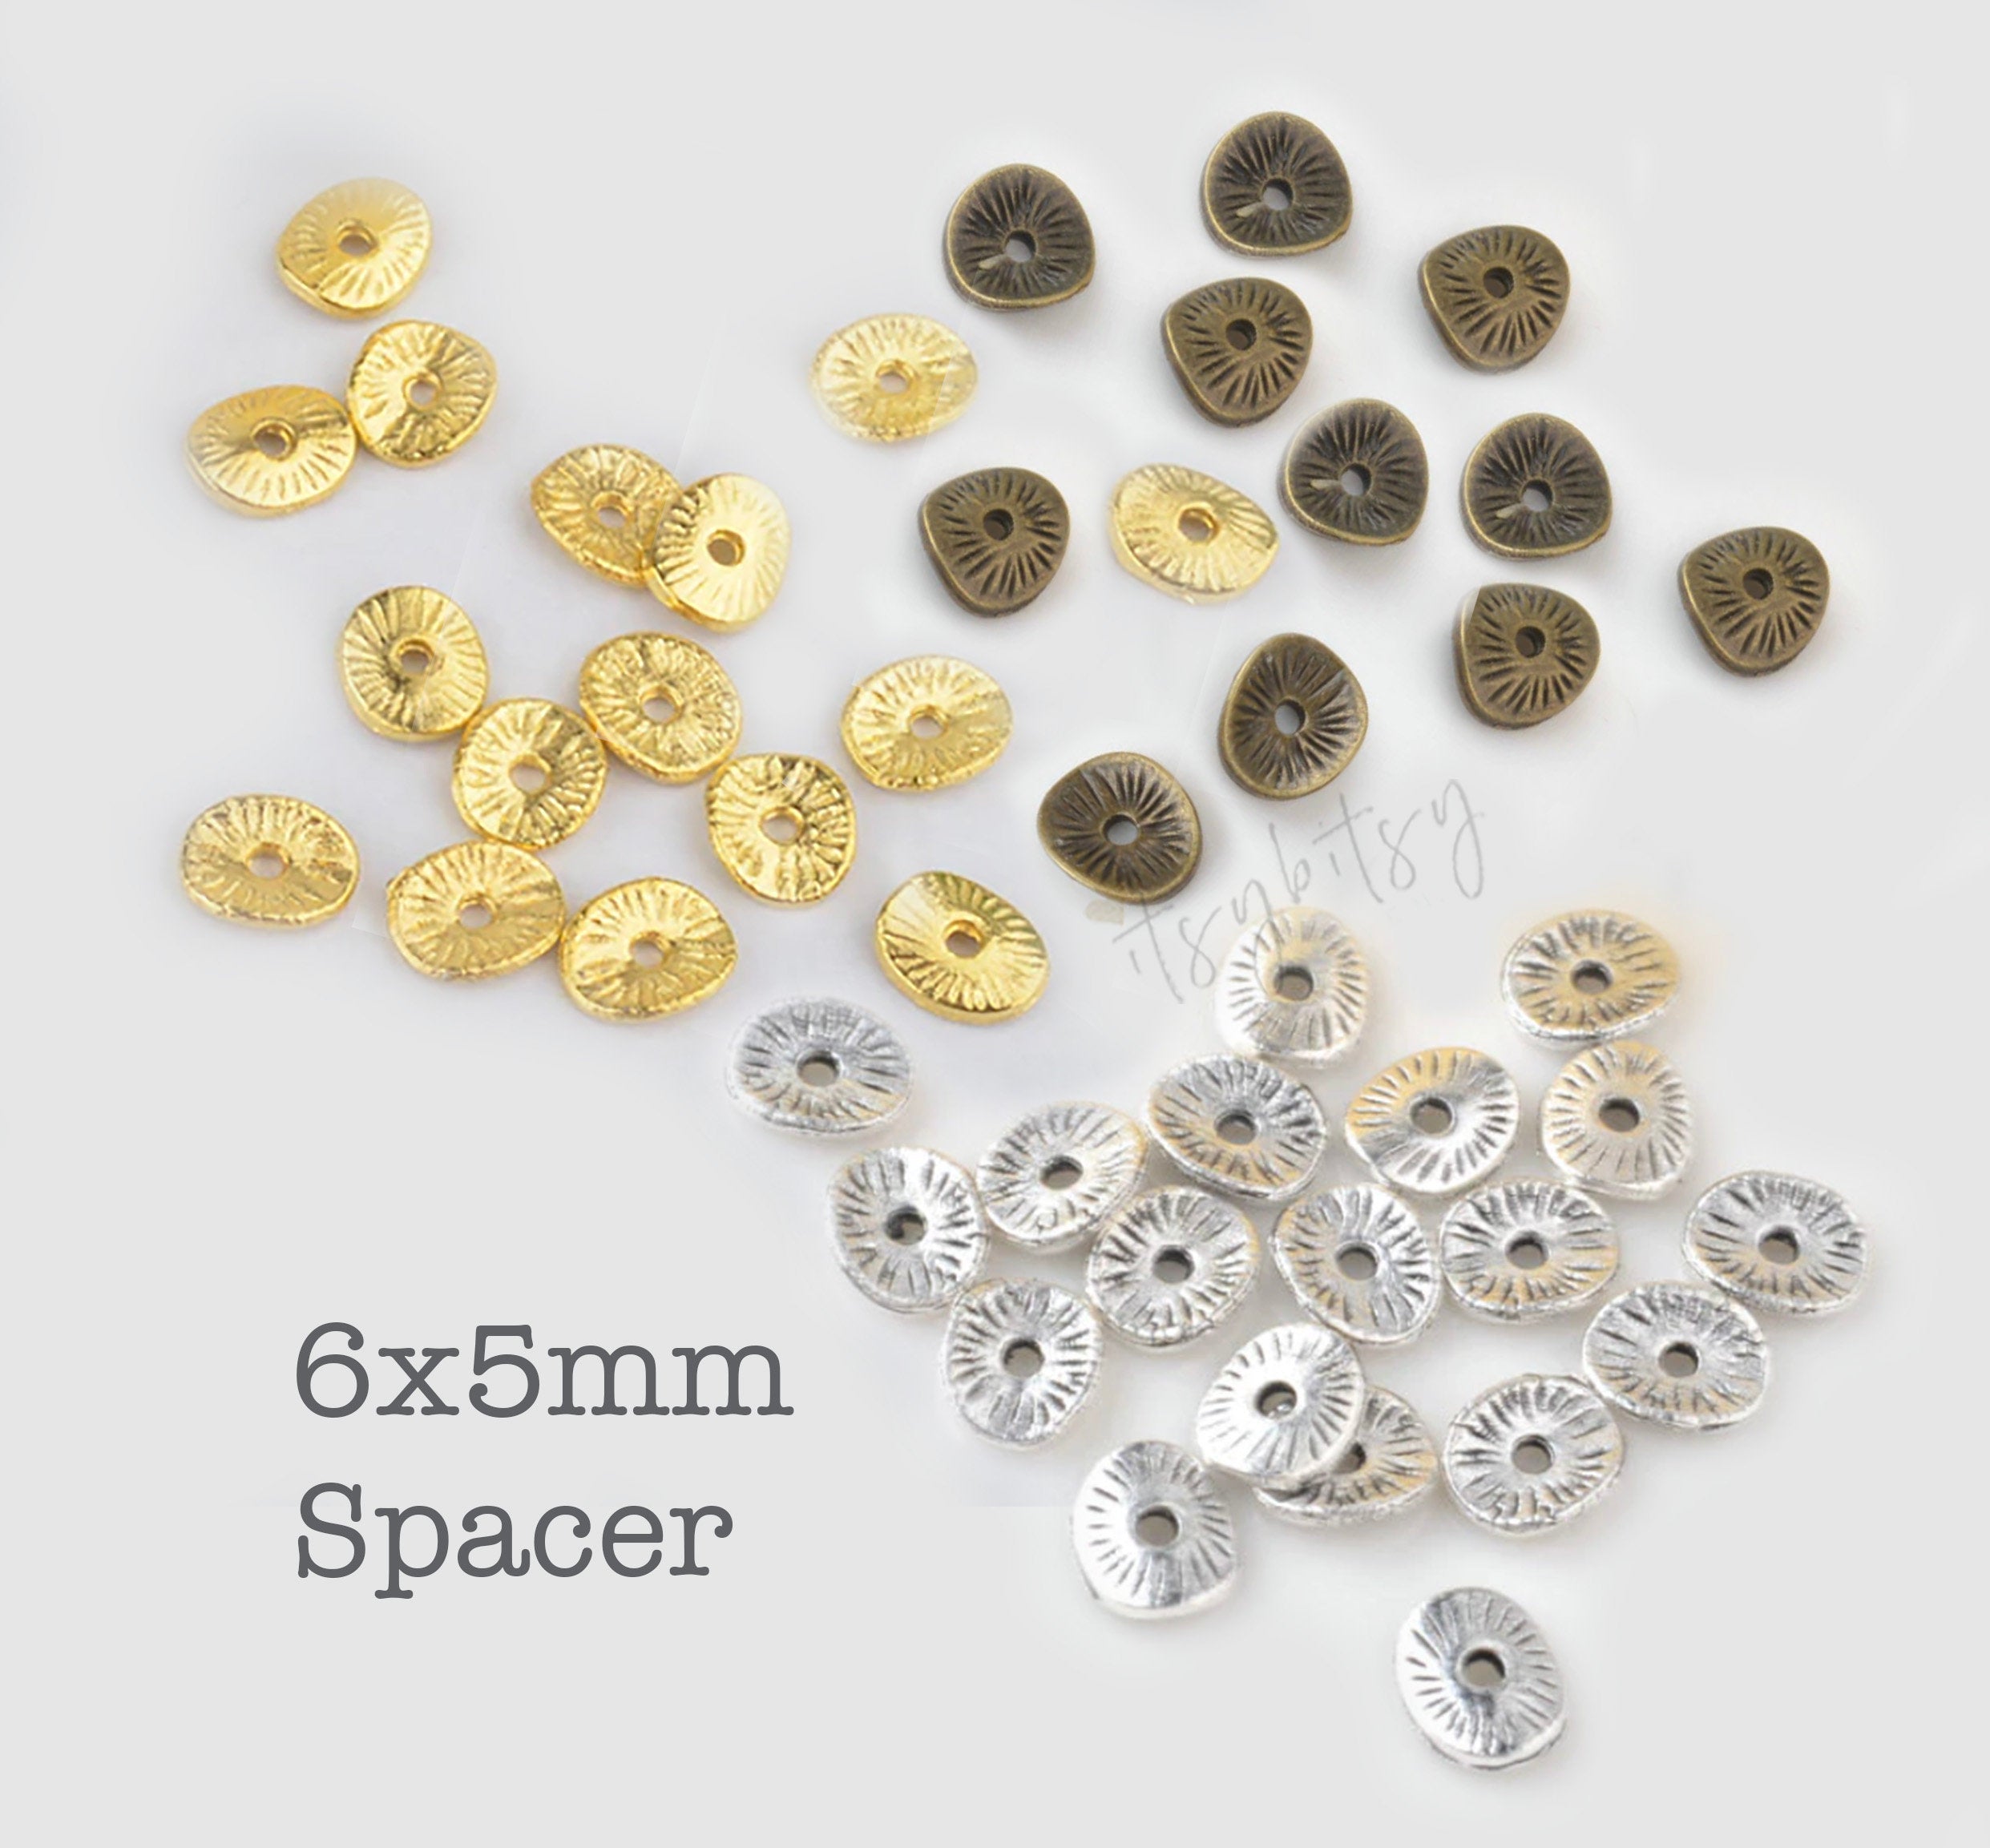 50/100pcs, 6x5mm, Zinc Alloy Round Bead Spacer Bead Separator Heishi Spacer - Choose your colour